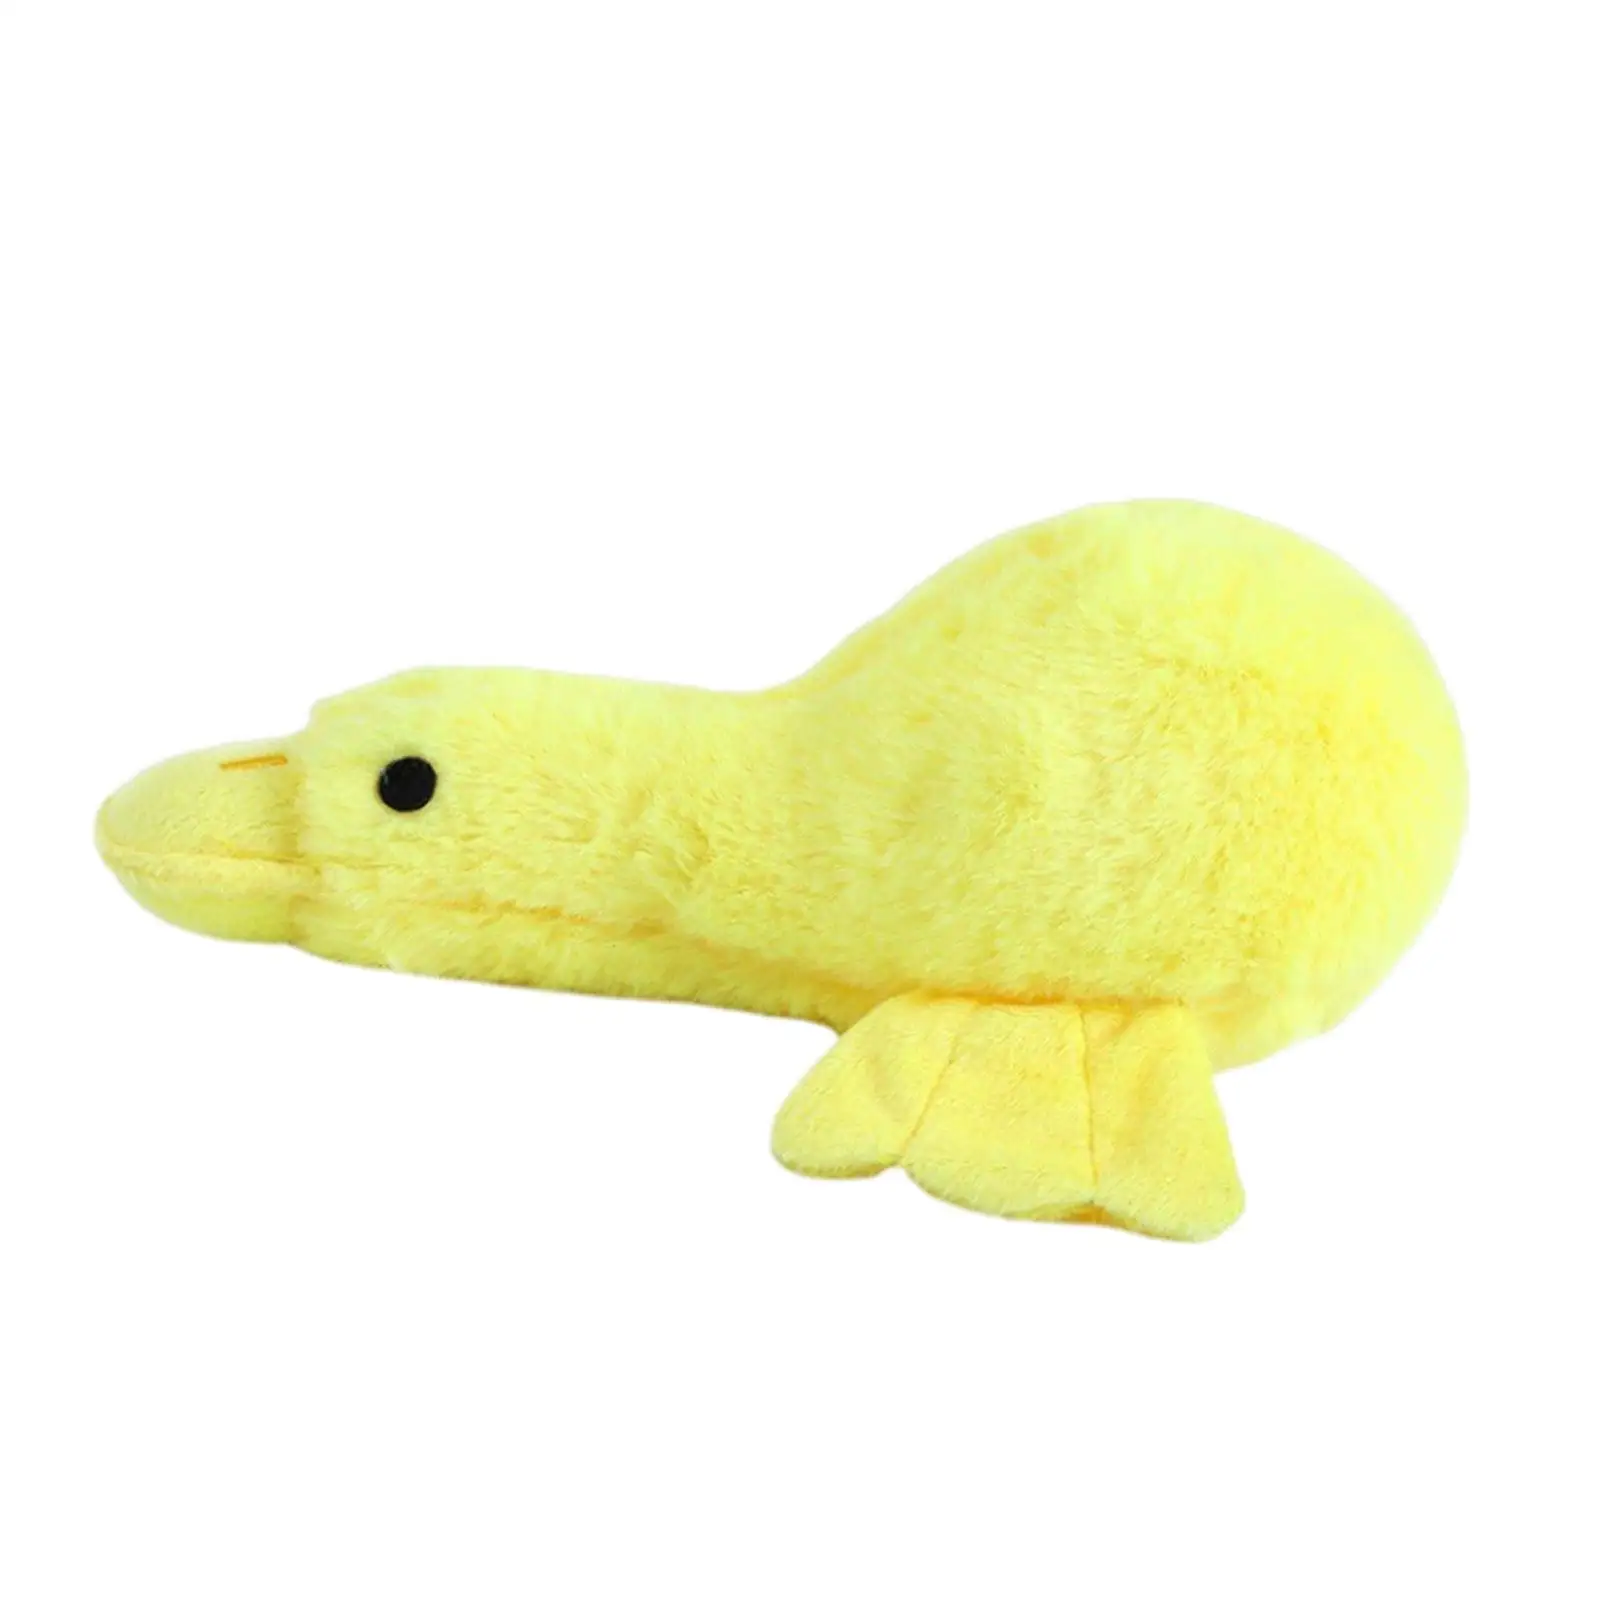 Squeaky Plush Dog Toy Indoor Pet Training Duck Shaped Puppy Chew Toys for Aggressive Chewers Cats Kitten Medium Large Dogs